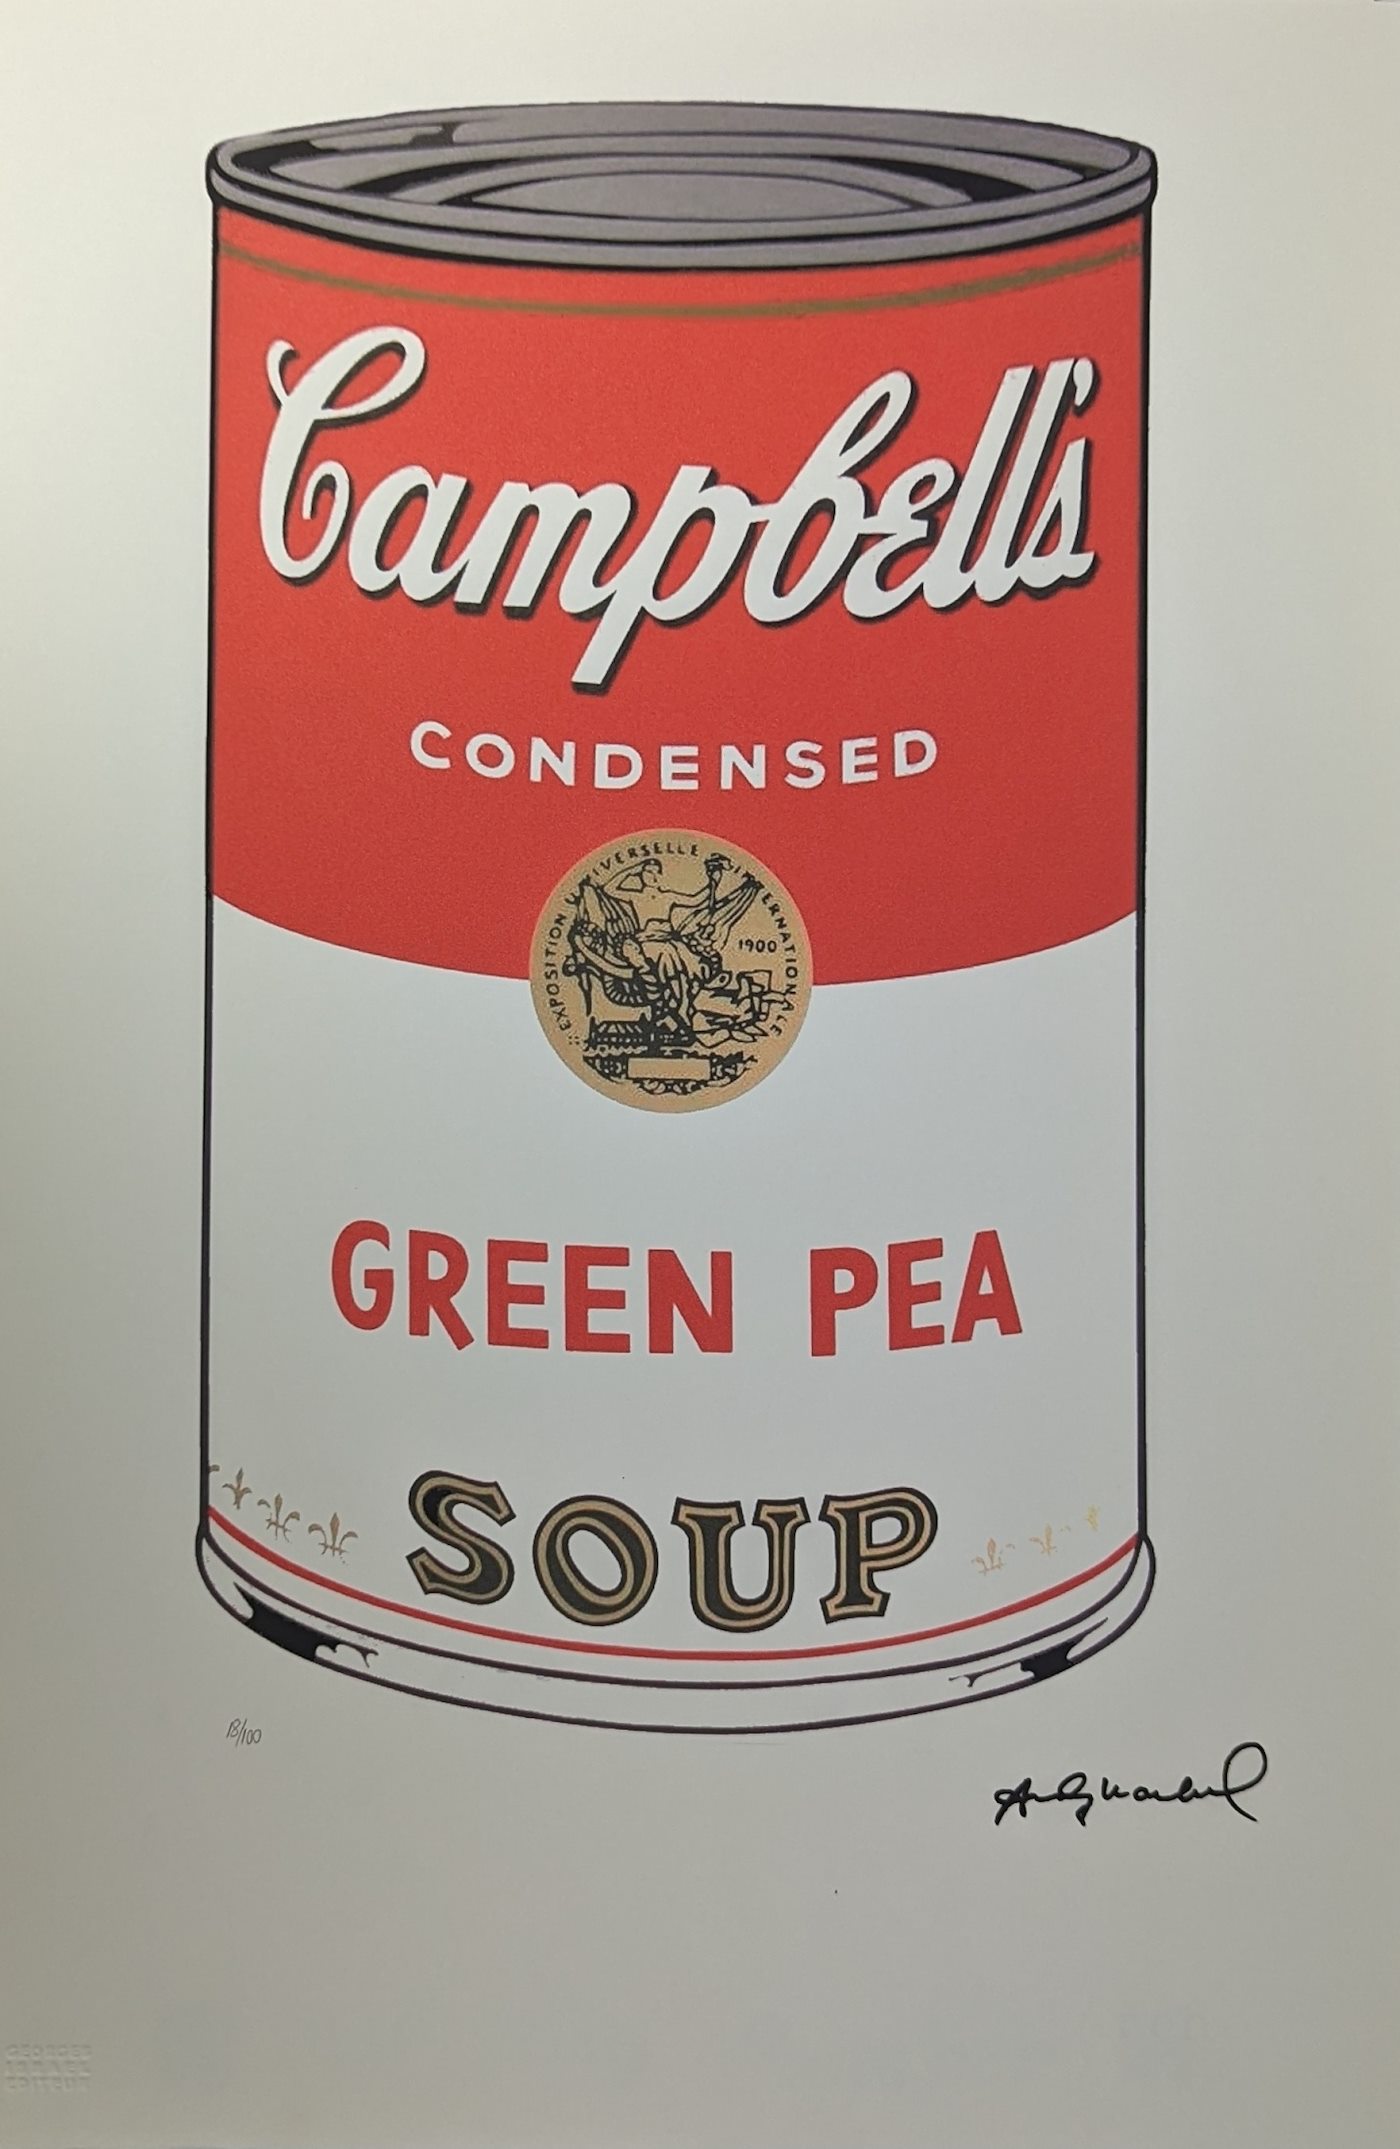 Andy Warhol - Campbell's